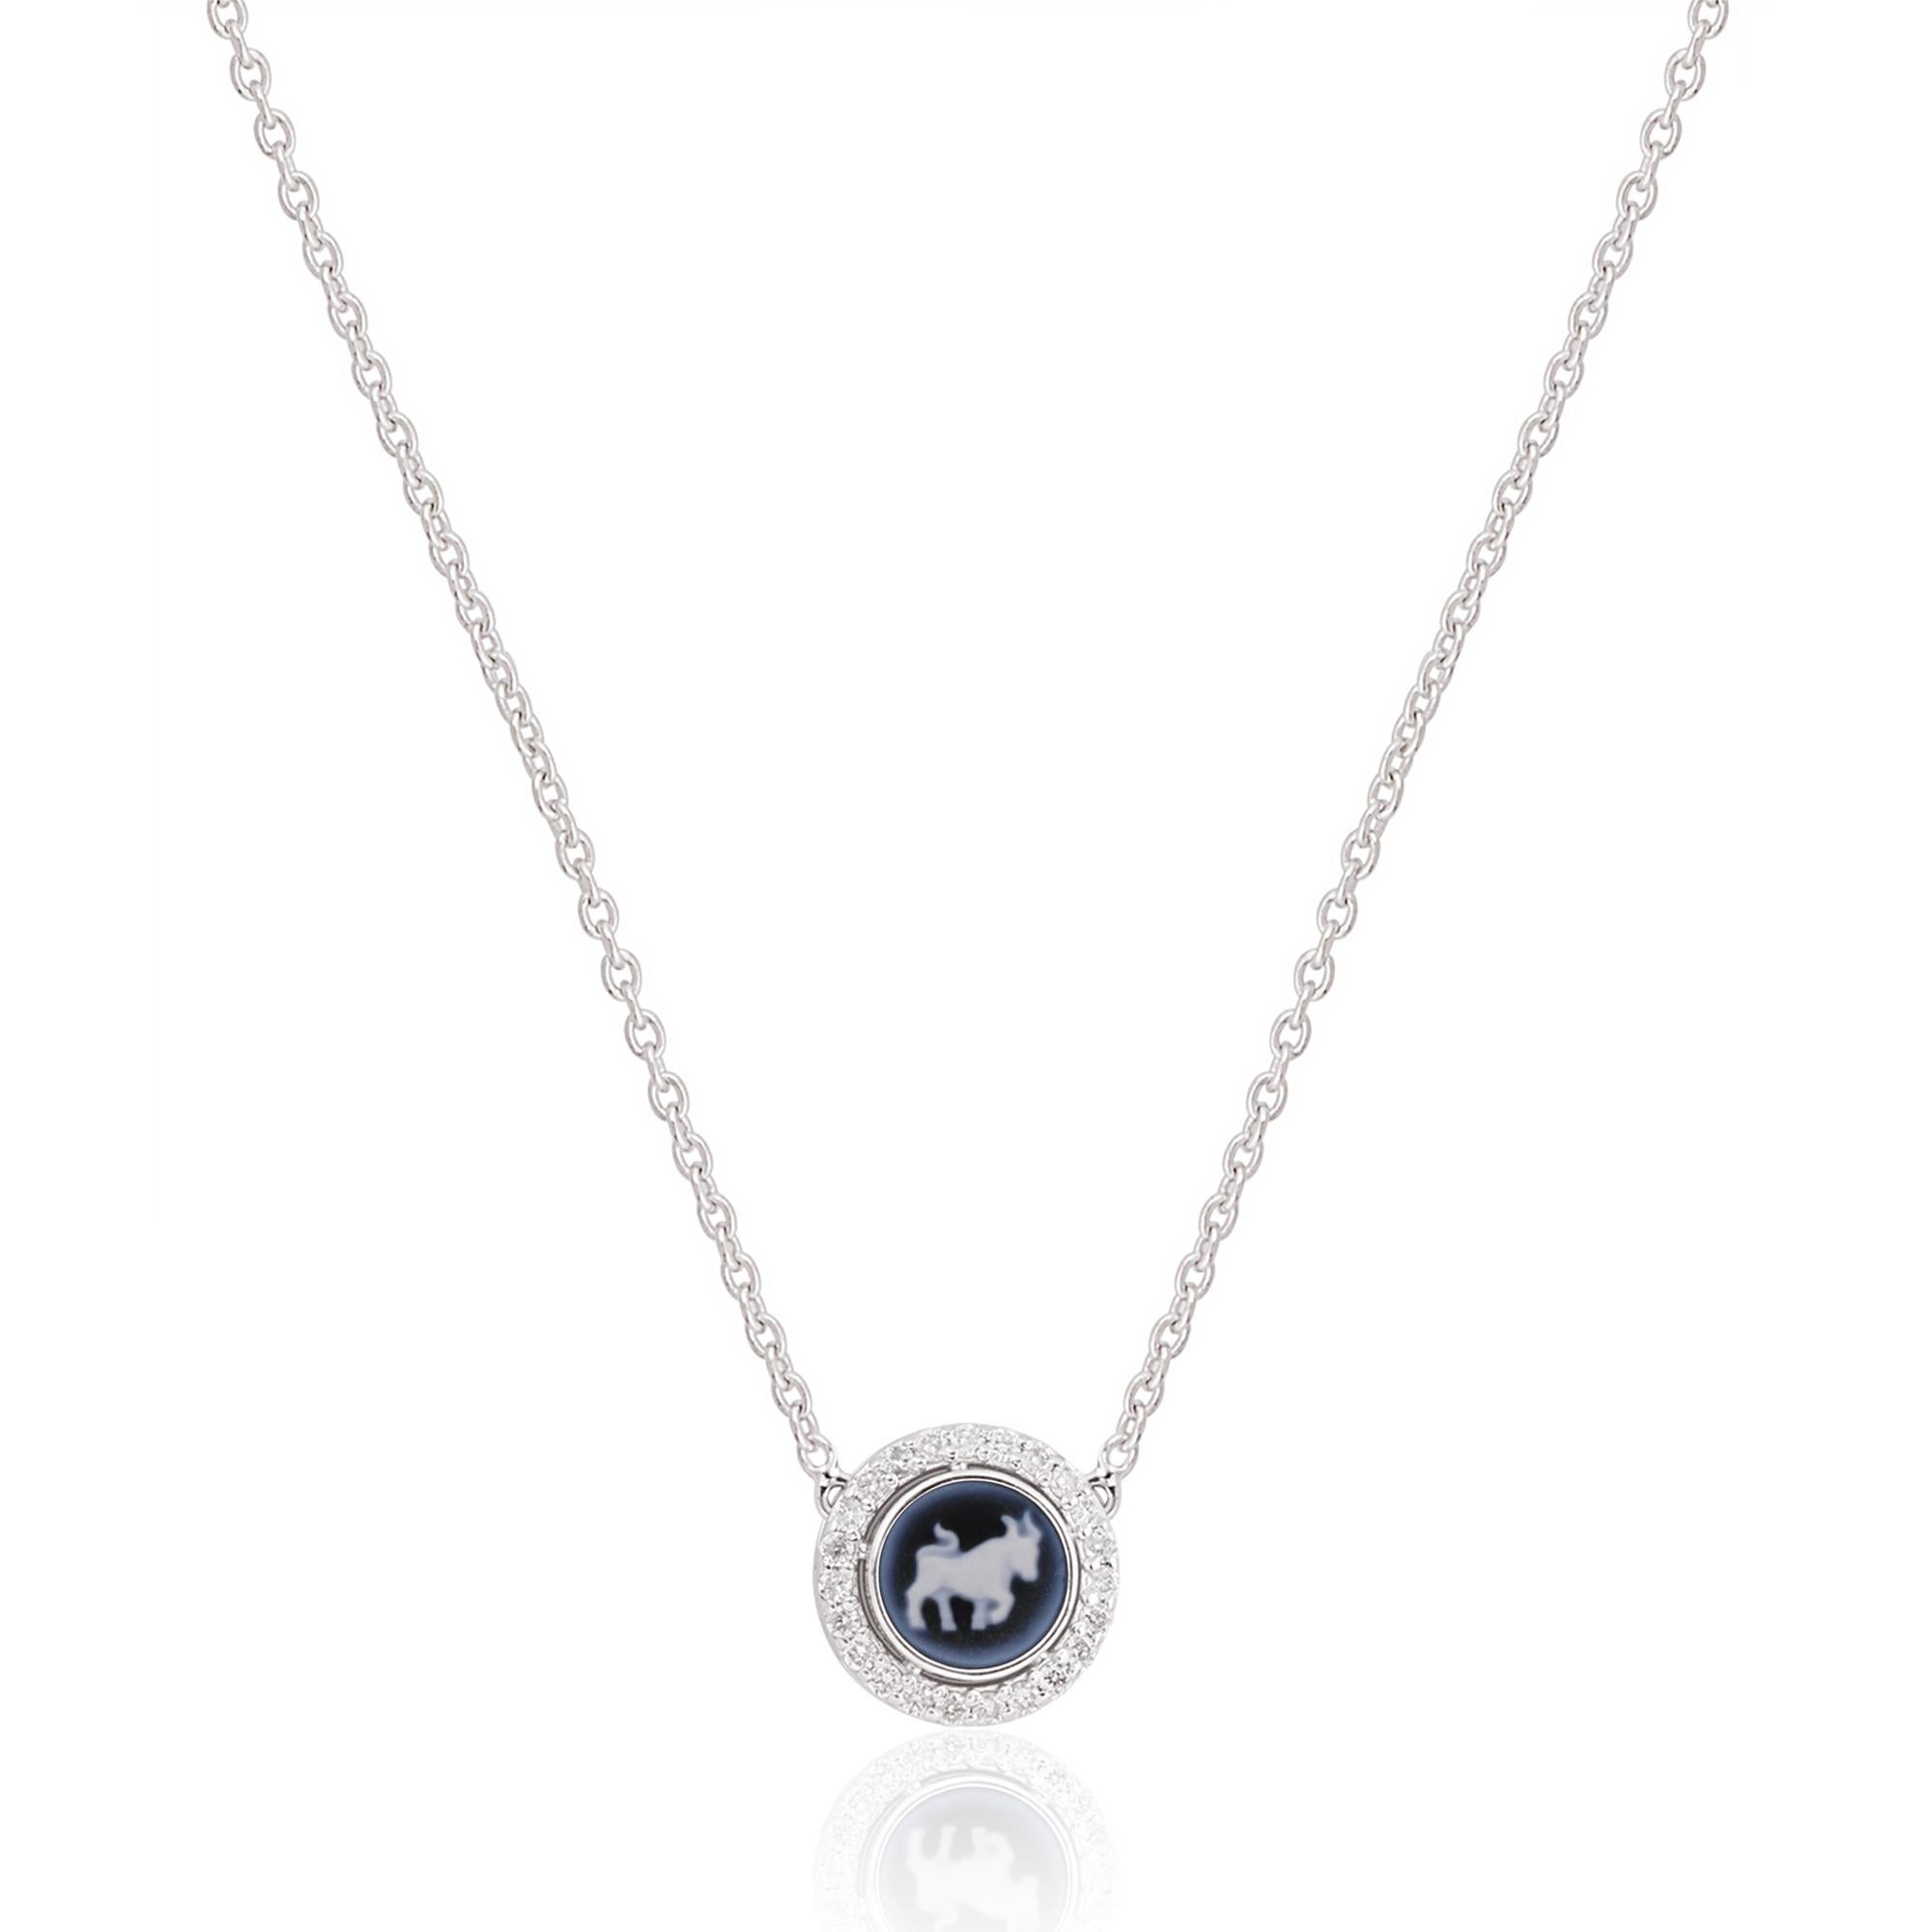 Celebrate your astrological identity with this exquisite Taurus zodiac sign pendant necklace. Meticulously crafted in 14-karat white gold, this fine jewelry piece showcases intricate detailing and shimmering pave diamonds, making it a true symbol of